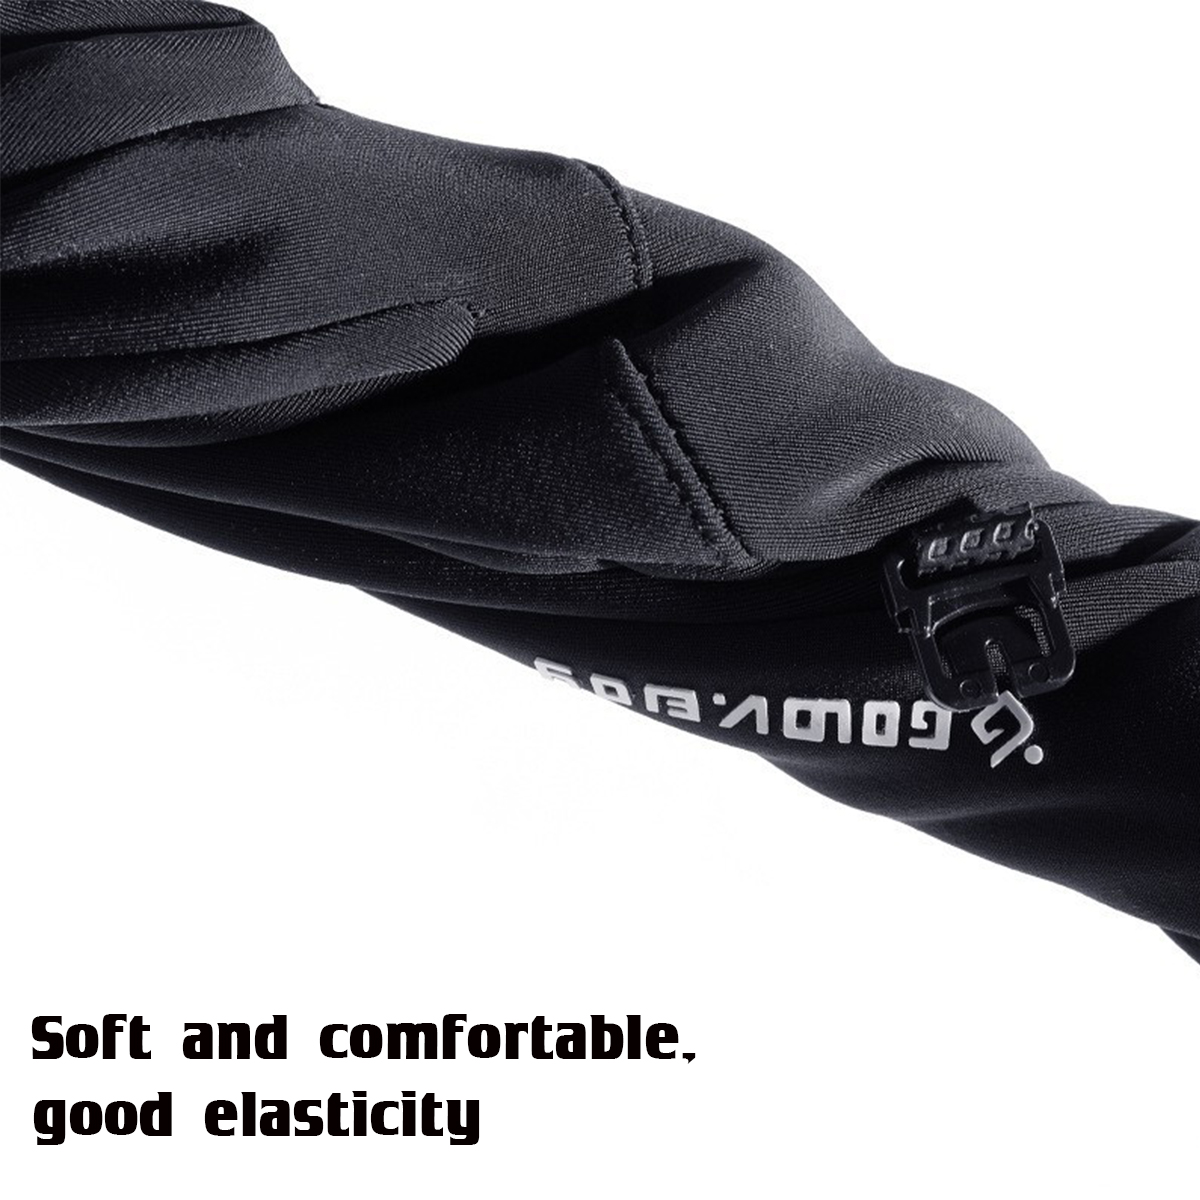 Winter-Warm-Touch-Screen-Thermal-Gloves-Ski-Snow-Snowboard-Cycling-Waterproof-Winter-Gloves-1921750-7